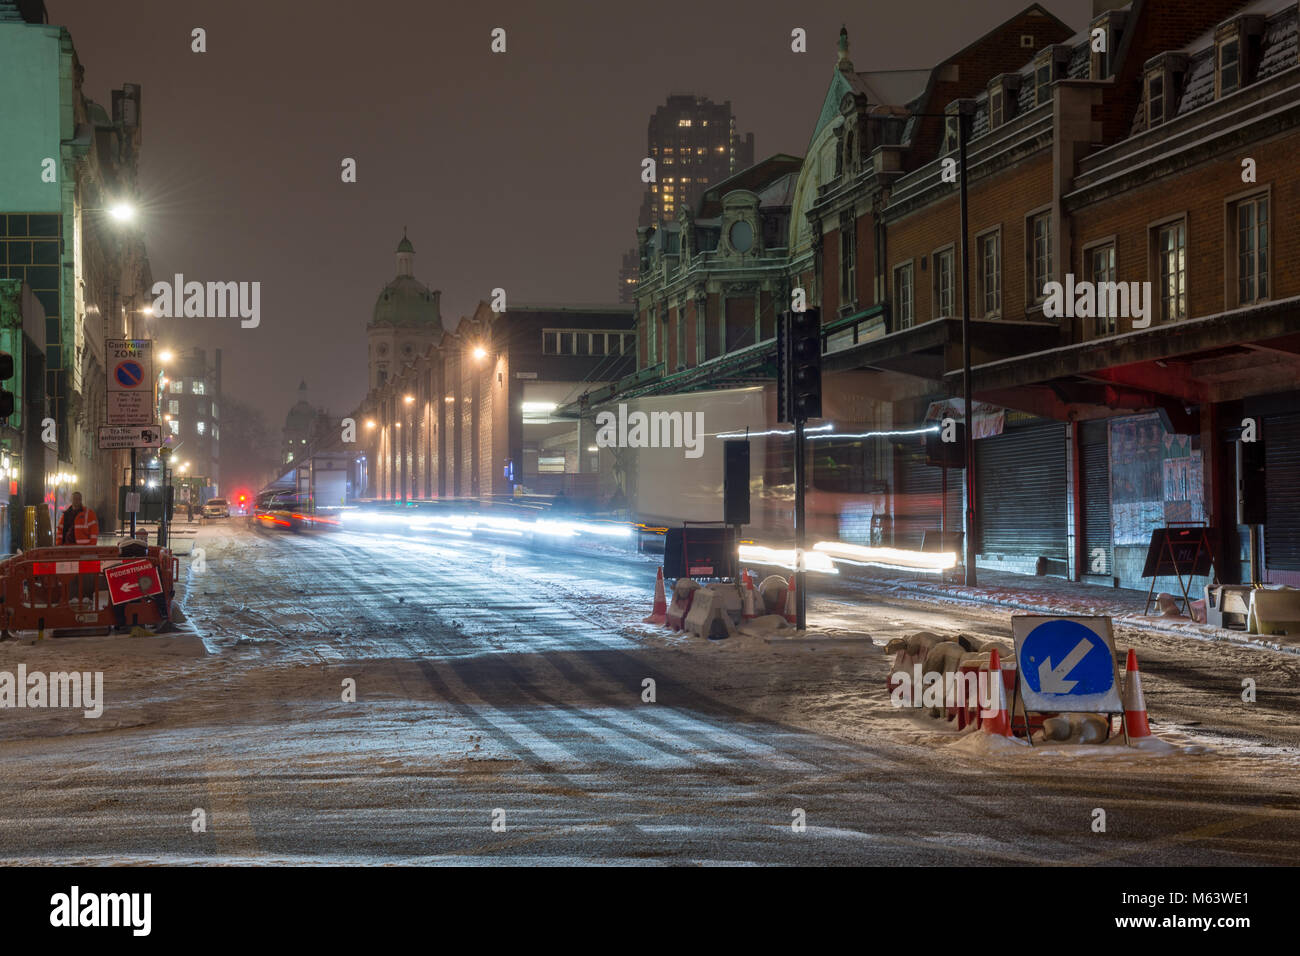 London, England, UK. 28th Feb, 2018. UK Weather: Traffic creates trails in snow falling on Farringdon Street outside Smithfield Market during the 'Beast From The East' snowstorm in London. Credit: Joe Dunckley/Alamy Live News Stock Photo